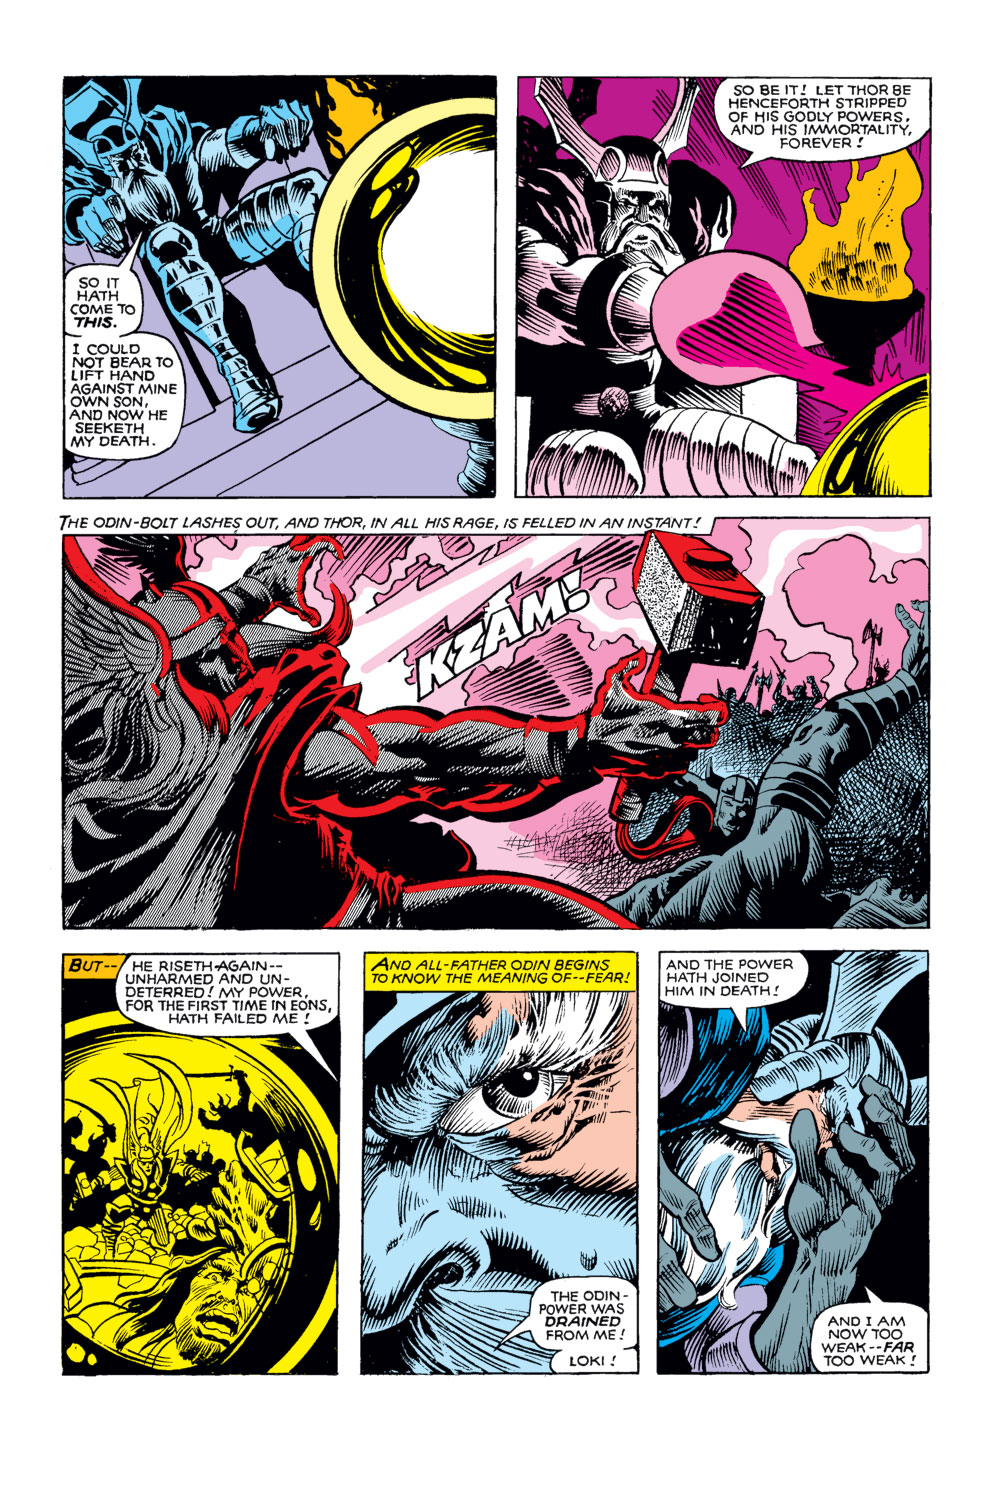 What If? (1977) issue 25 - Thor and the Avengers battled the gods - Page 29